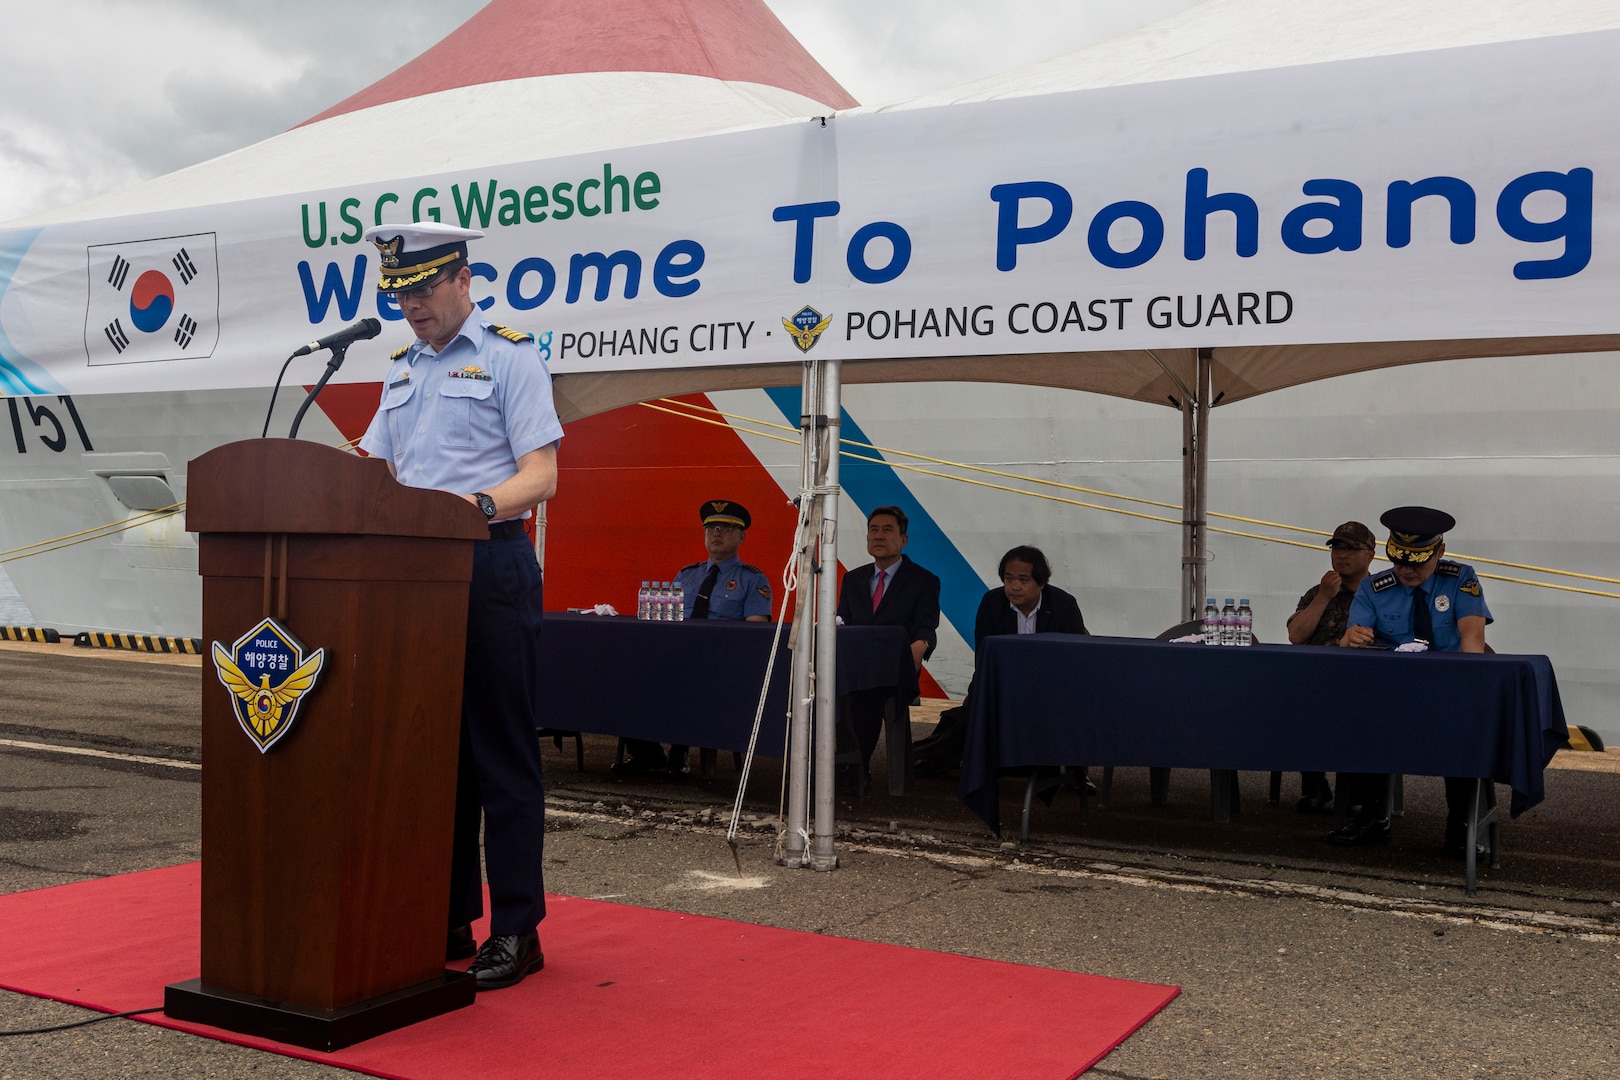 U.S. Coast Guard Capt. Tyson Scofield, commanding officer of the U.S. Coast Guard Cutter Waesche (WMSL-751), gives a speech during a welcoming reception in Pohang, Republic of Korea, June 9, 2024. The Waesche’s arrival marked the first visit by a U.S. Coast Guard ship to Pohang, which was marked with an opening ceremony between United States and Korea Coast Guardsmen. Waesche is the second U.S. Coast Guard National Security Cutter deployed to the Indo-Pacific in 2024. Waesche is assigned to Destroyer Squadron (DESRON) 15, the Navy’s largest DESRON and the U.S. 7th Fleet’s principal surface force. Coast Guard cutters routinely deploy to the region to engage with partner nations to ensure a free and open Indo-Pacific. (U.S. Marine Corps photo by Cpl. Elijah Murphy)